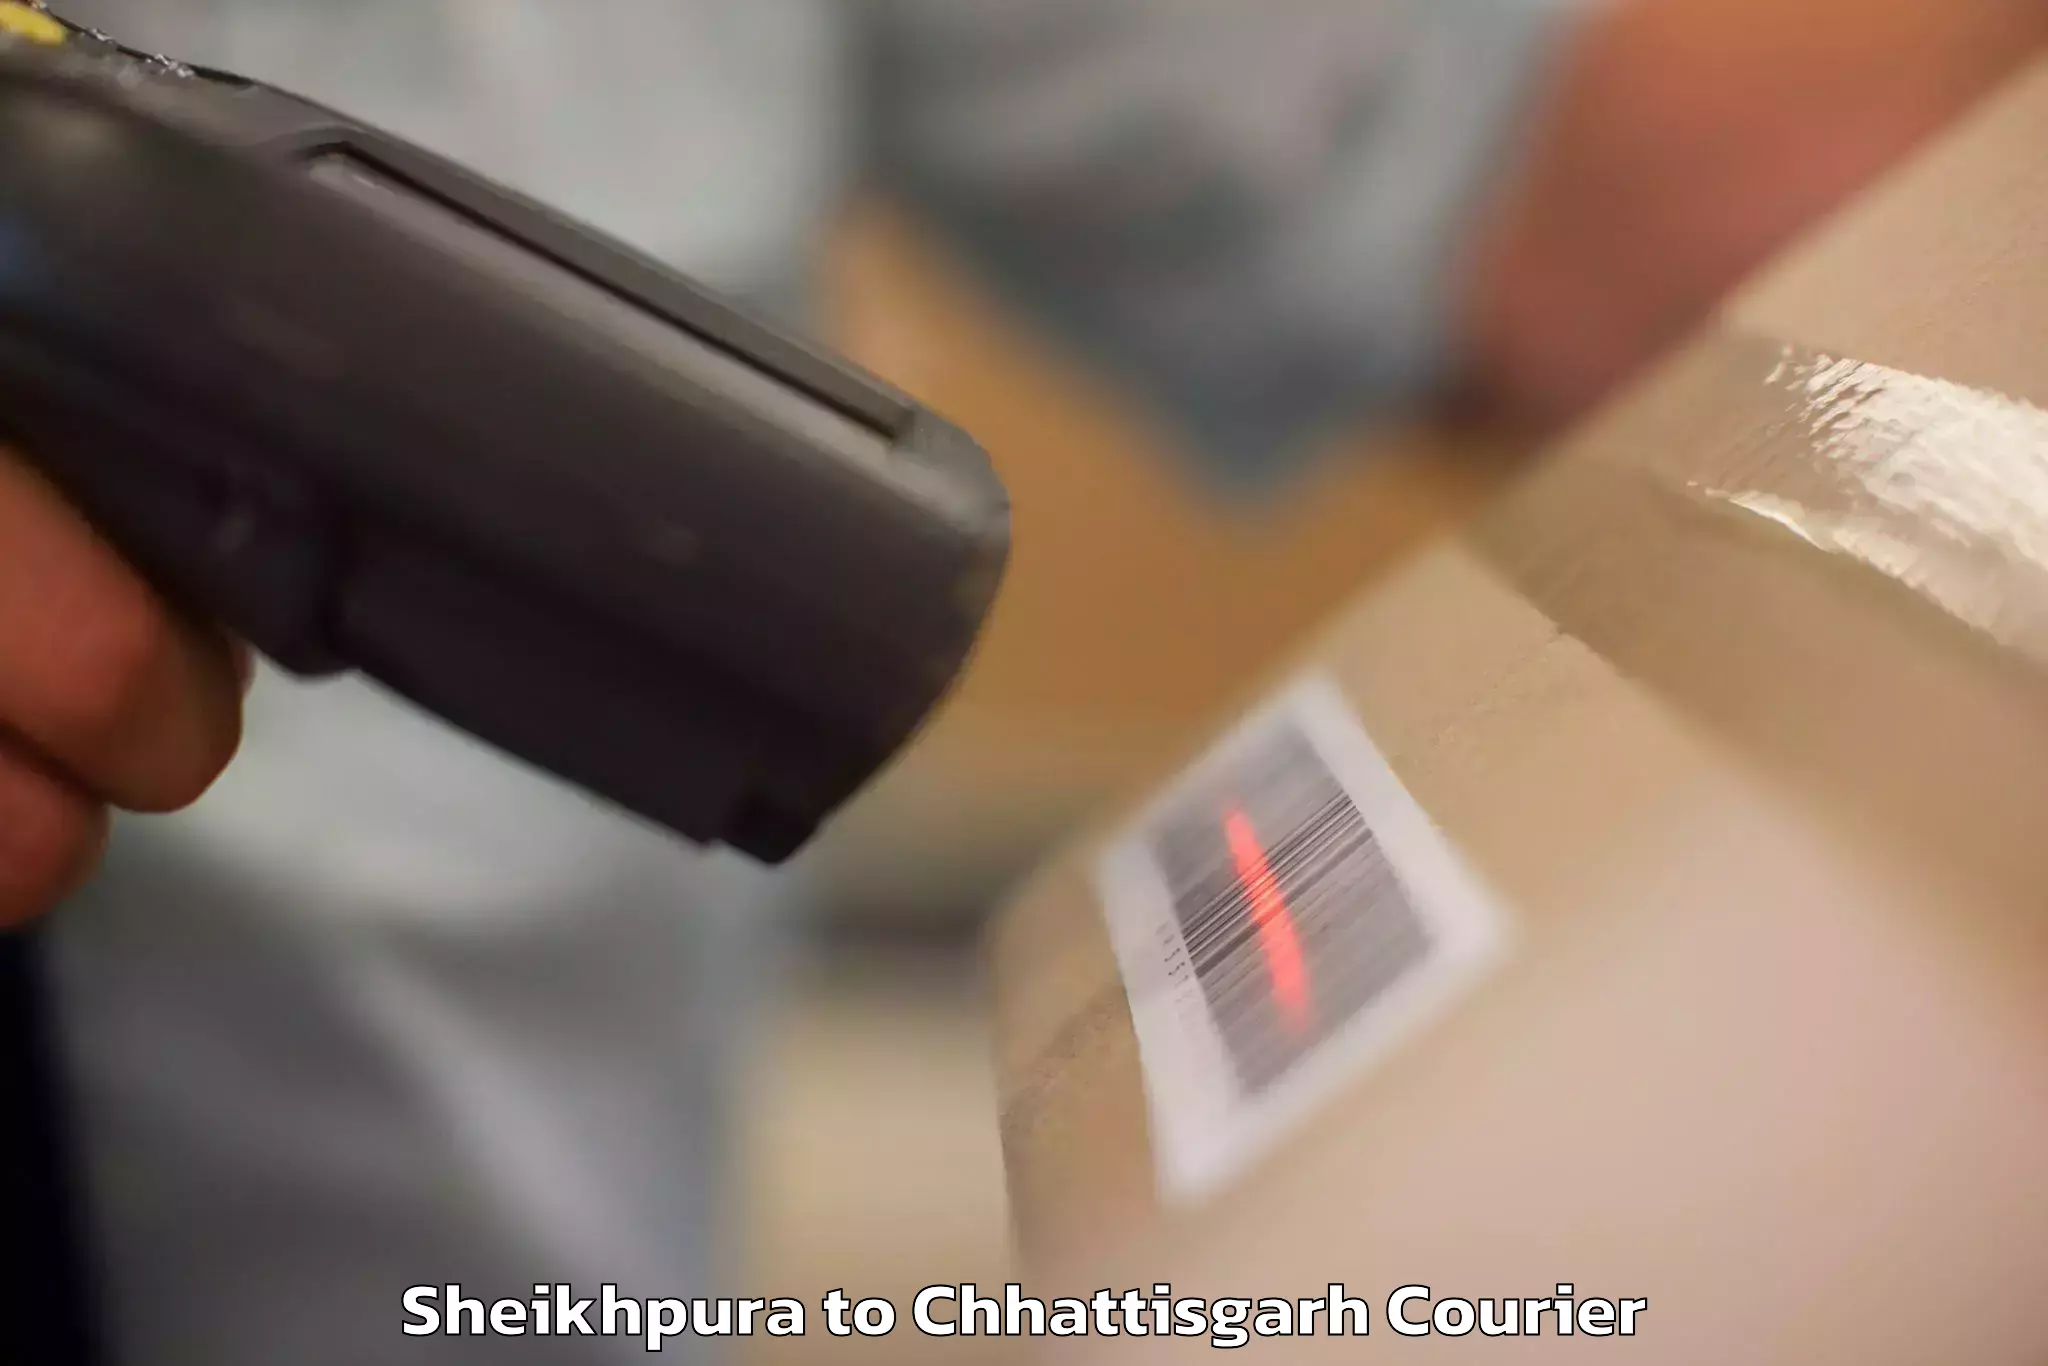 Personal effects shipping in Sheikhpura to Pendra